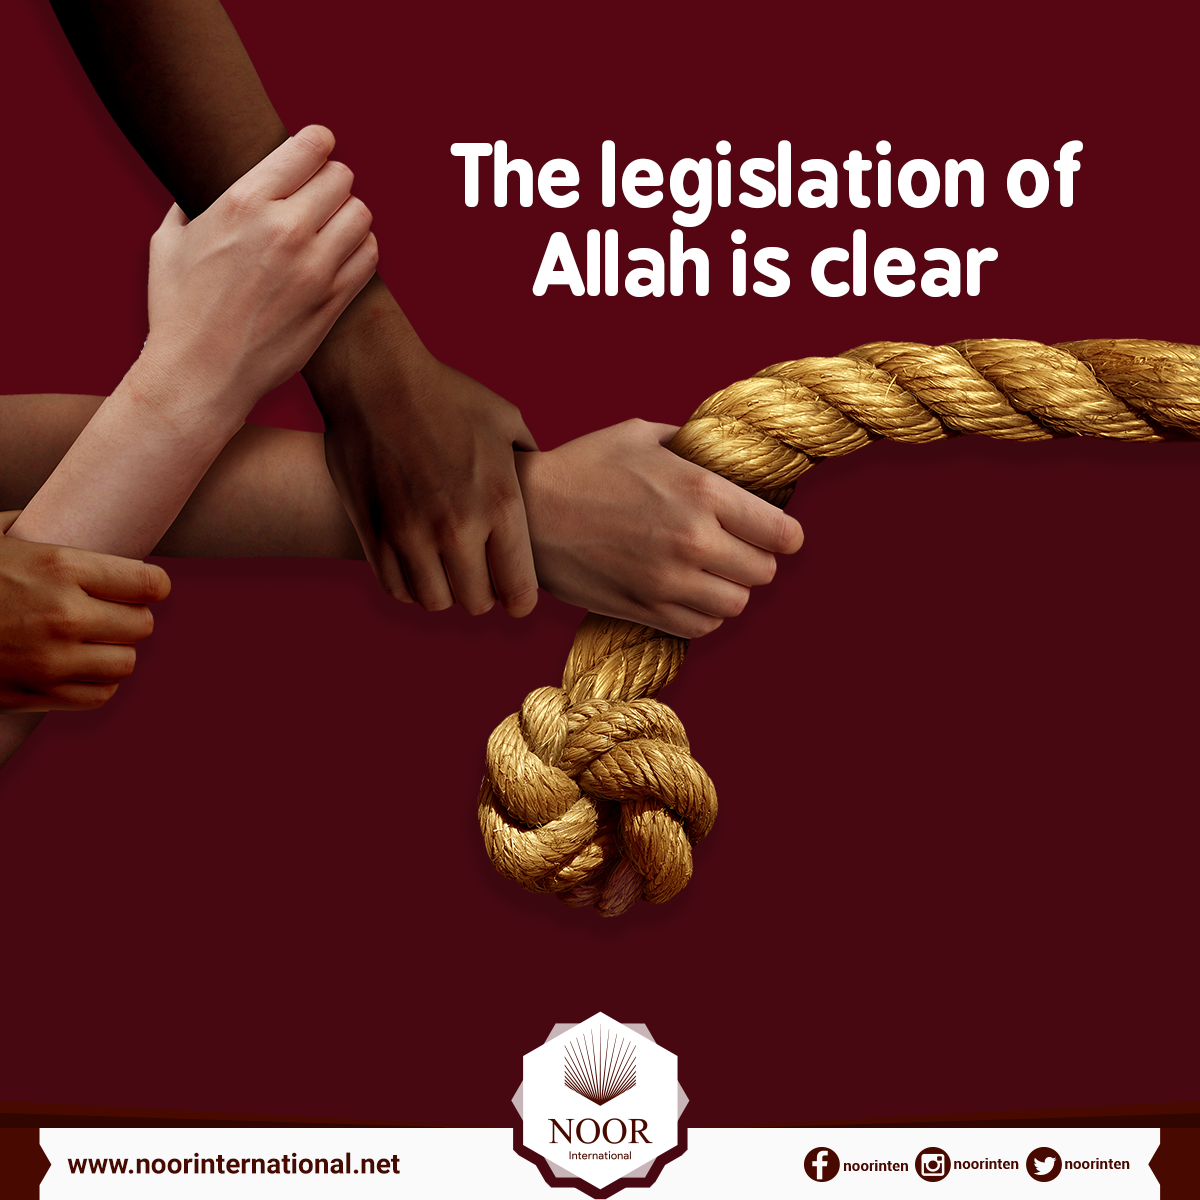 The legislation of Allah is clear